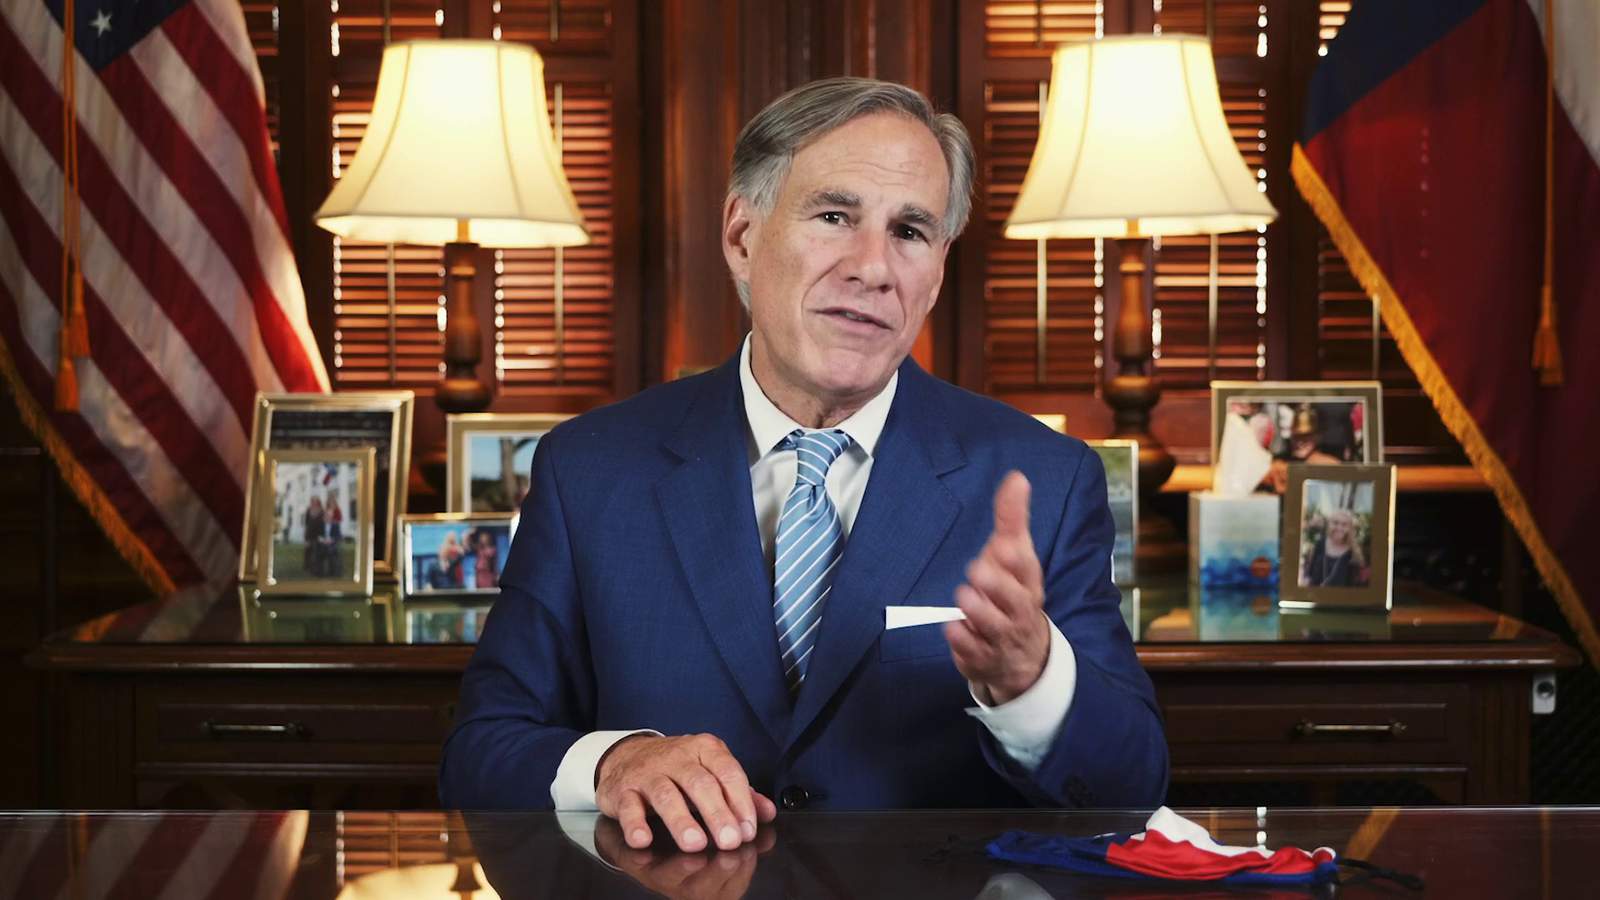 This is how Texans reacted to Gov. Abbott’s statewide mask mandate